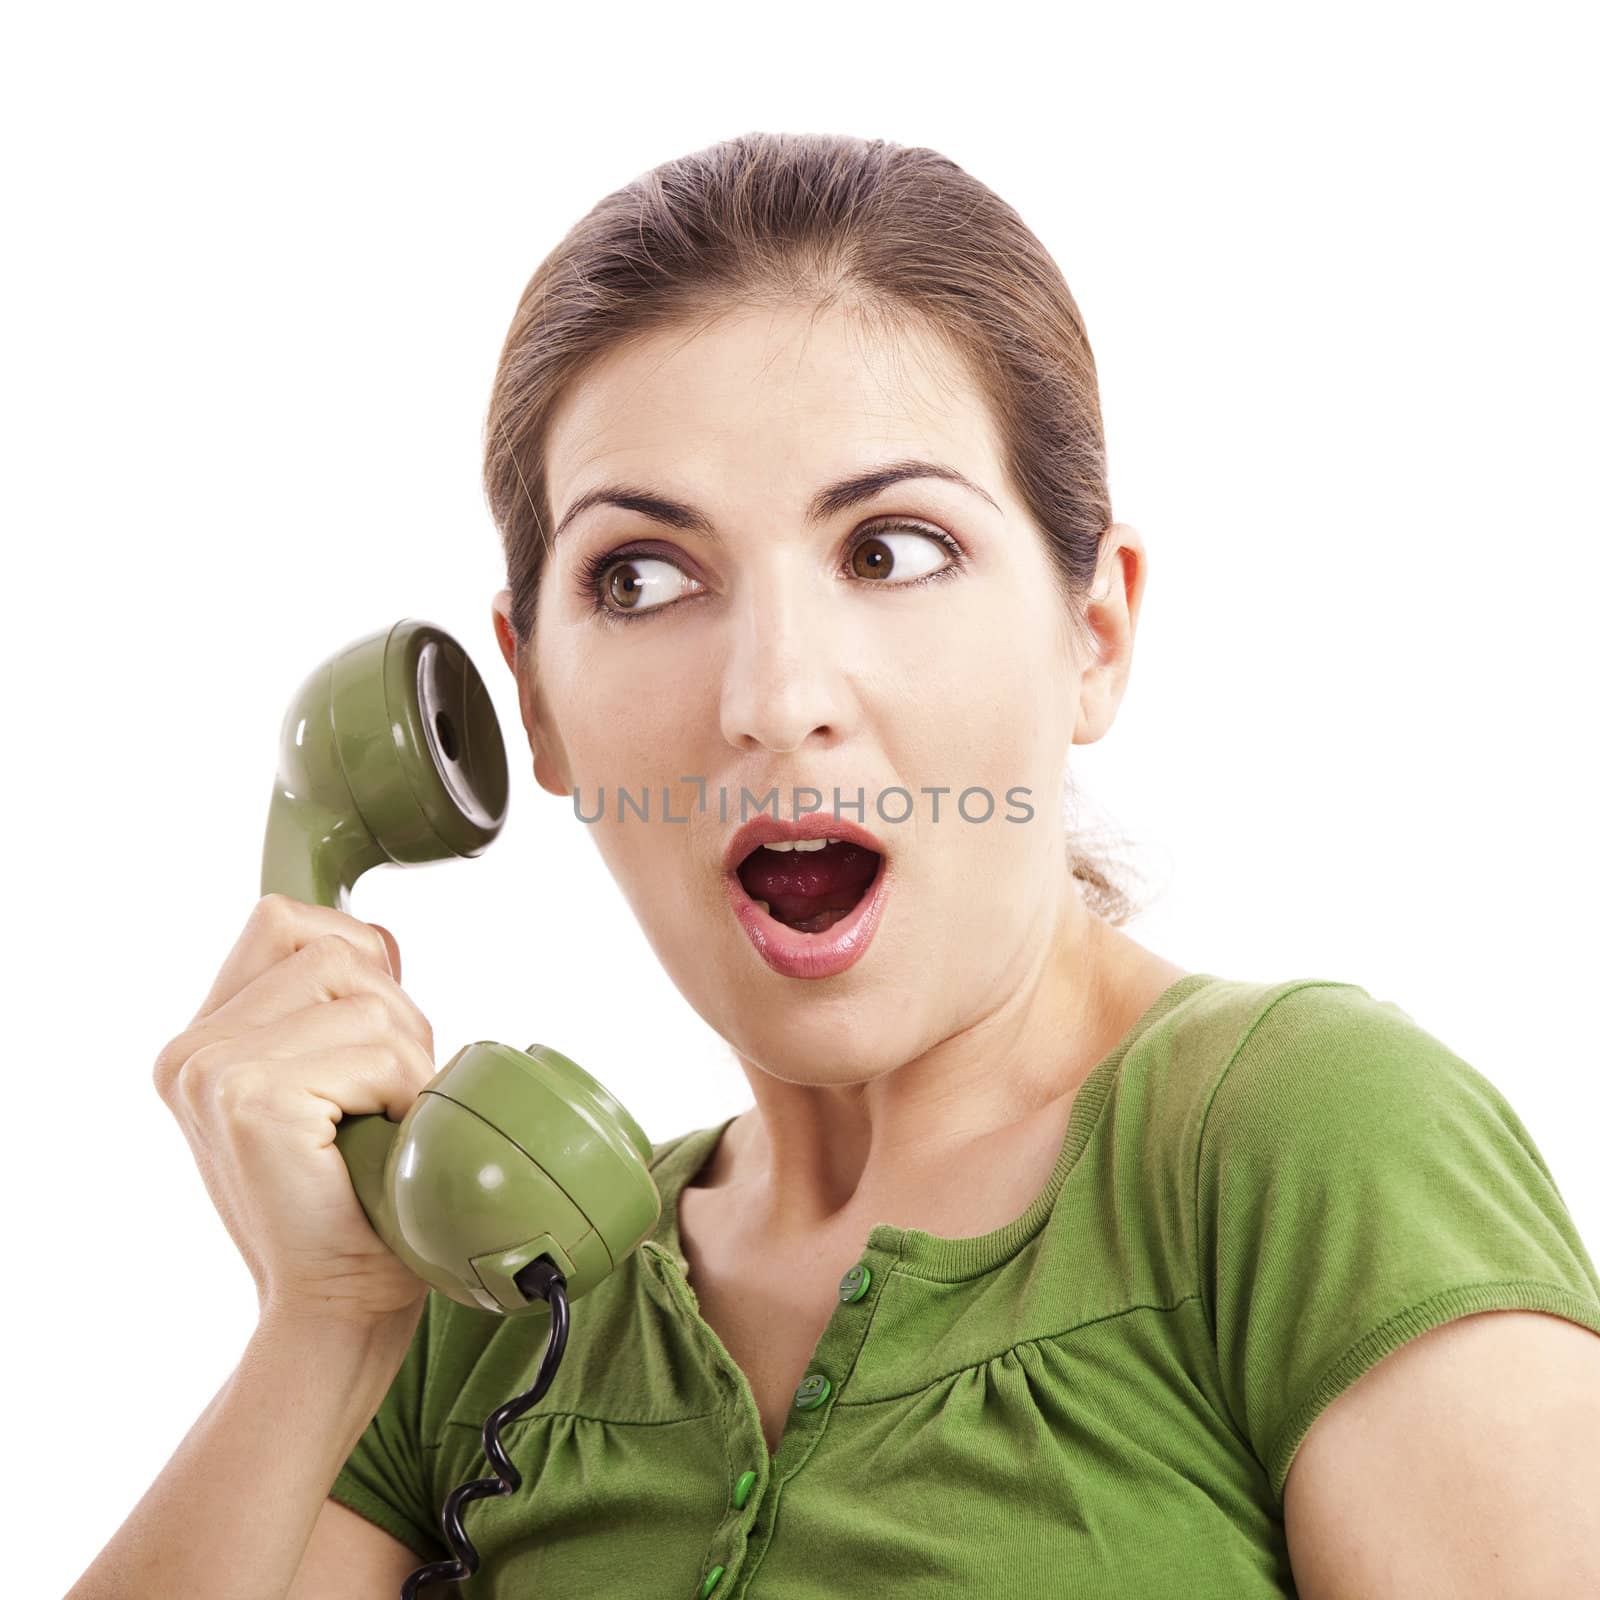 Beautiful woman at phone astonished with something